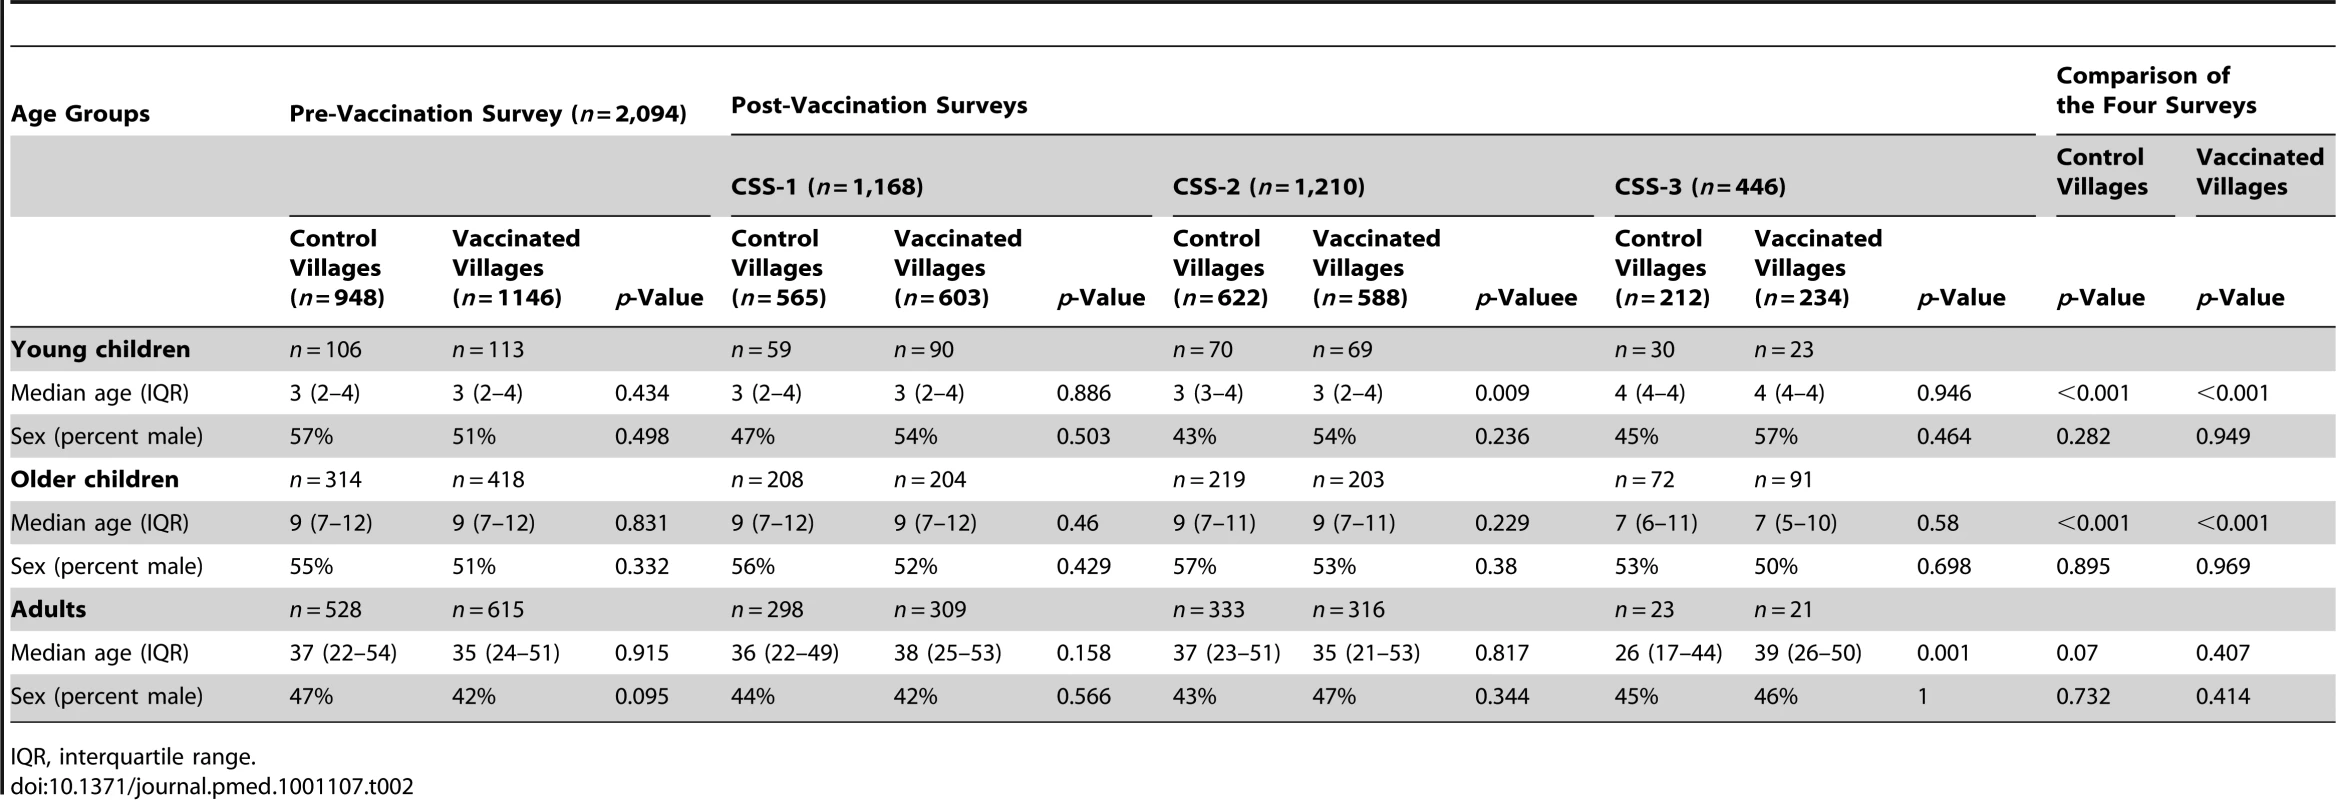 Age and sex of individuals studied in vaccinated and control villages in each of the CSSs.